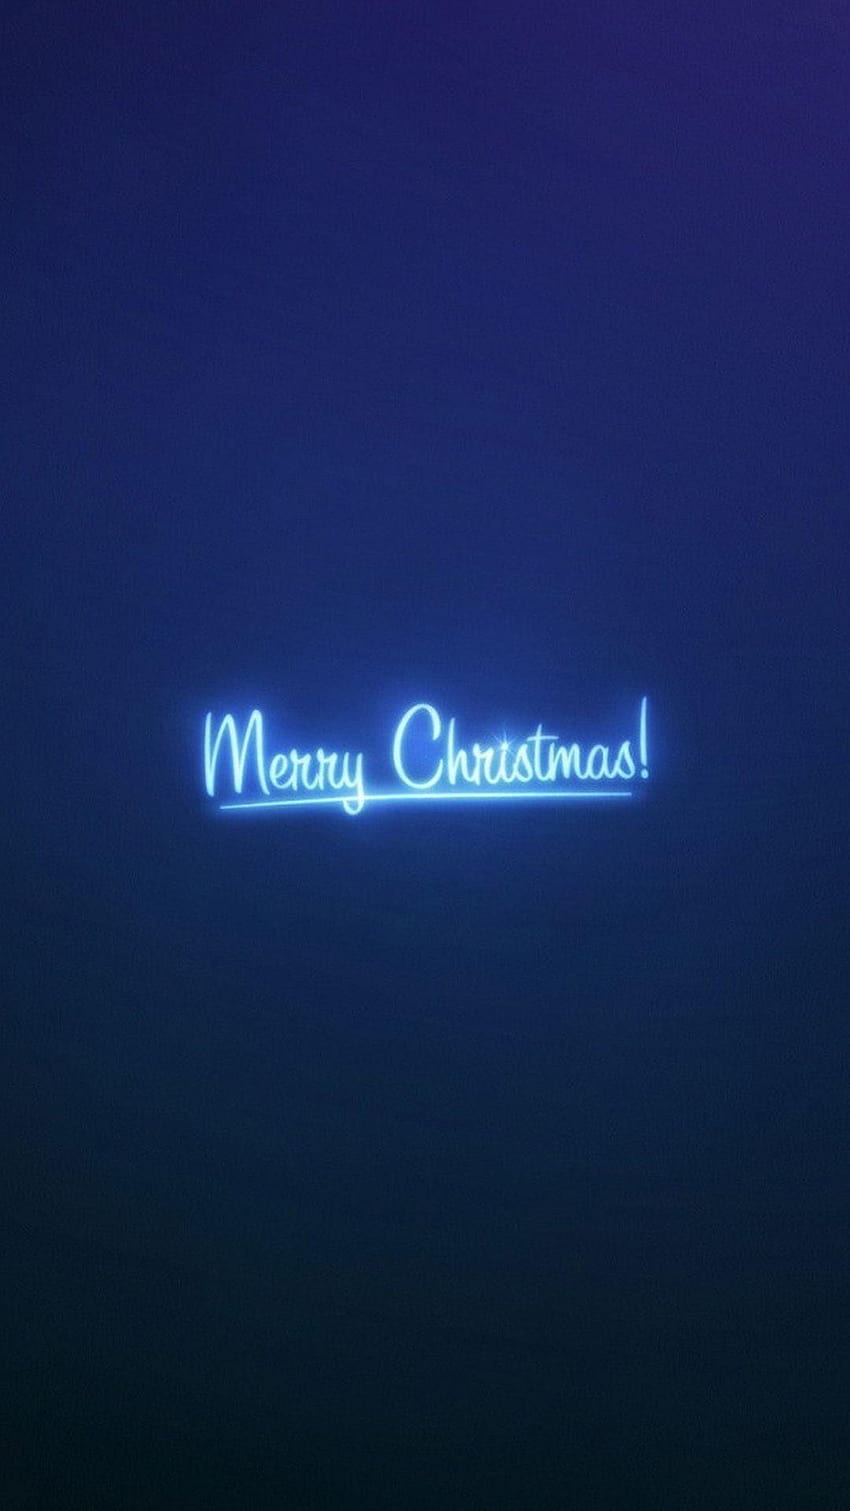 Merry Christmas Neon Blue Light Android, blue neon lights HD phone wallpaper